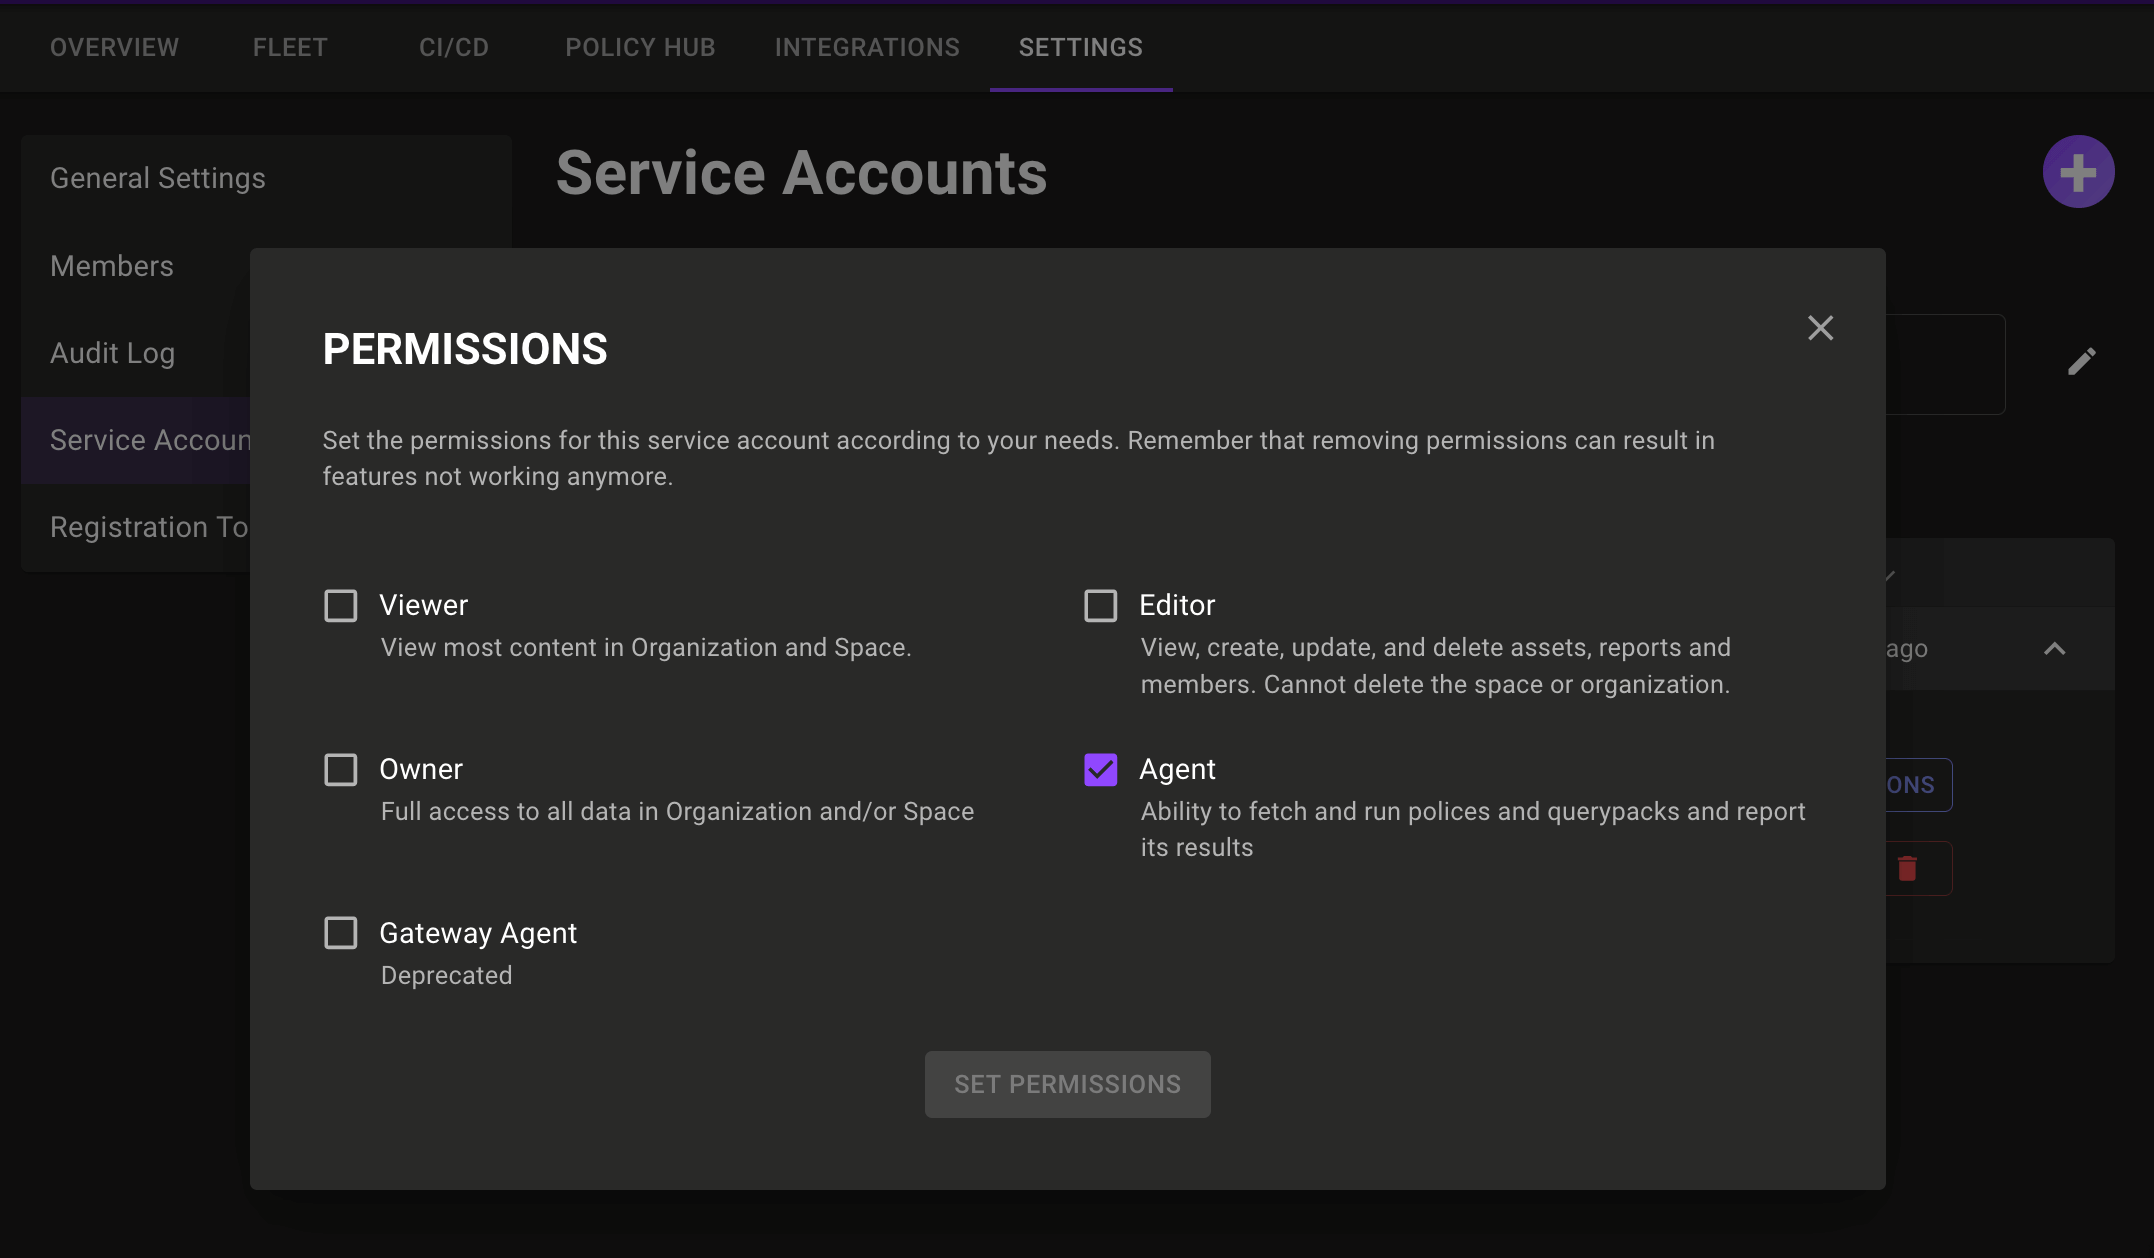 Permissions selection modal